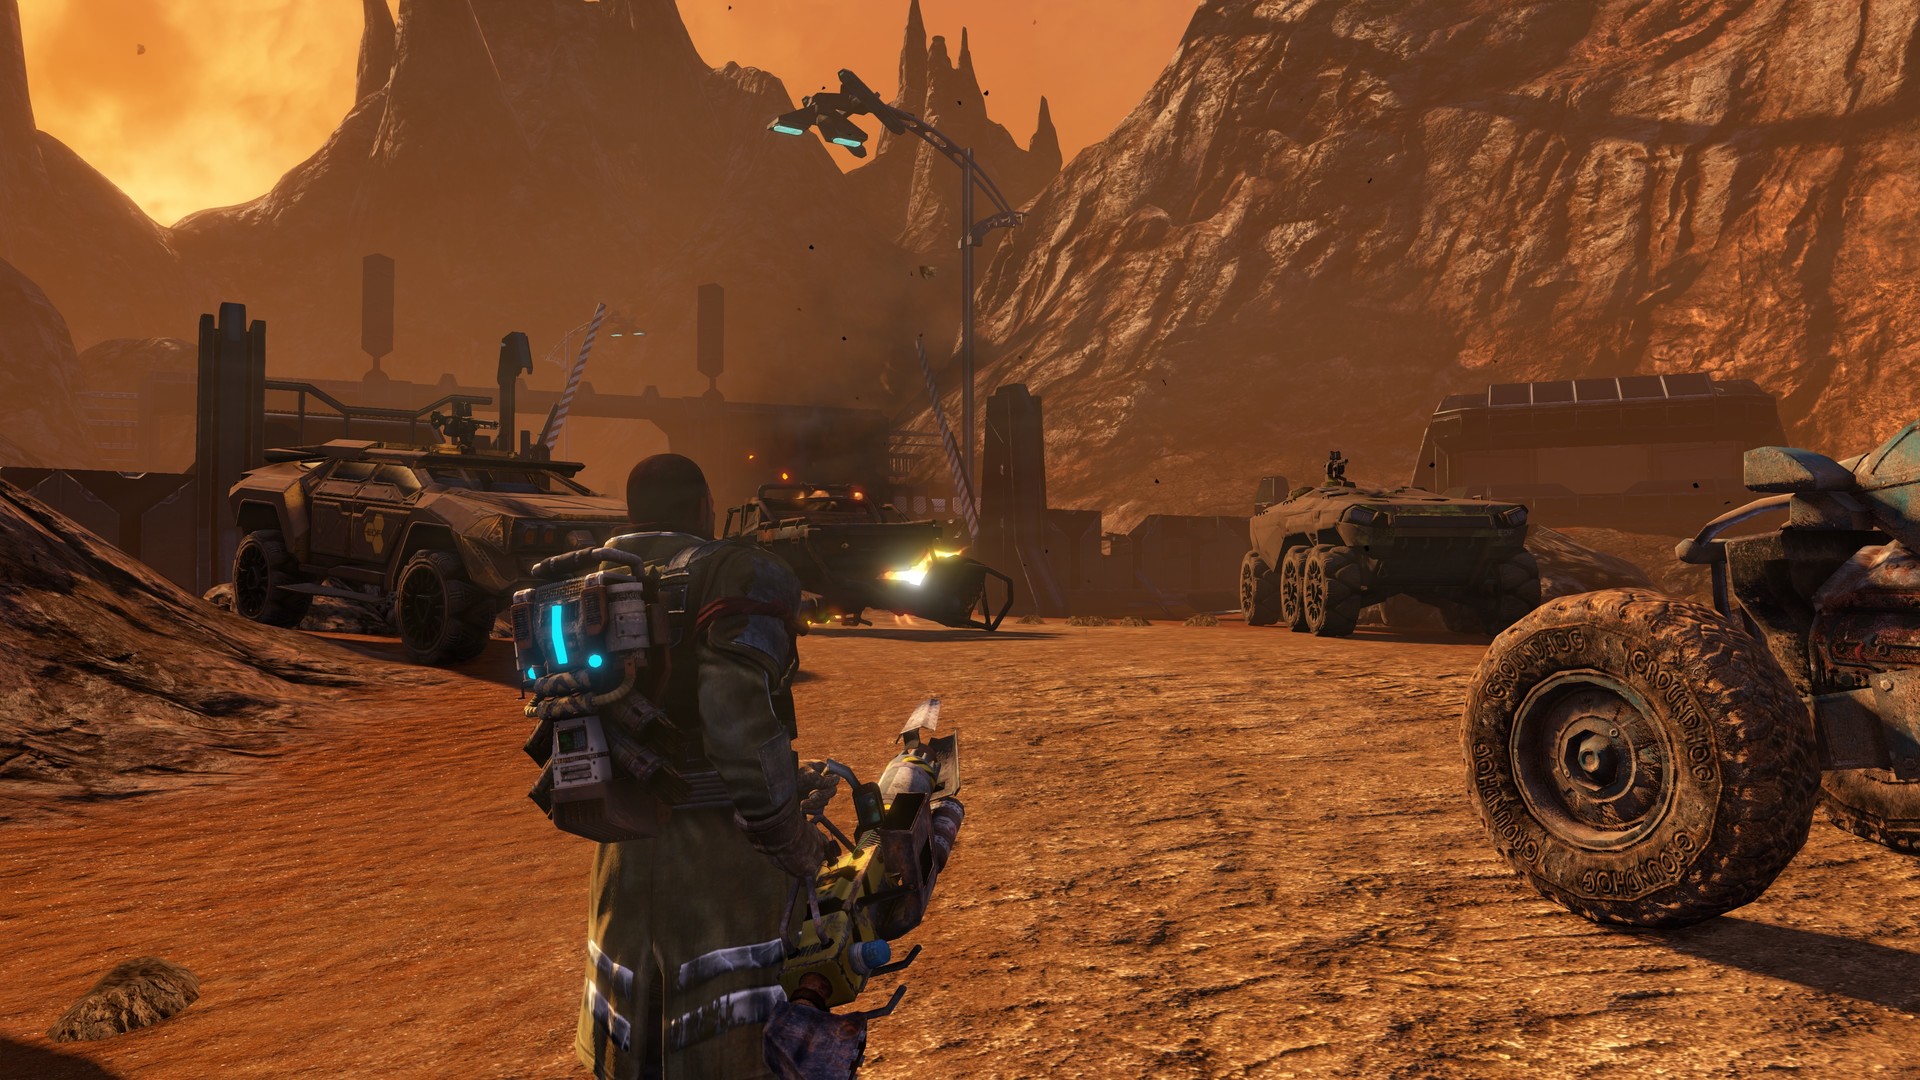 Save 80% on Red Faction Guerrilla Re-Mars-tered Steam